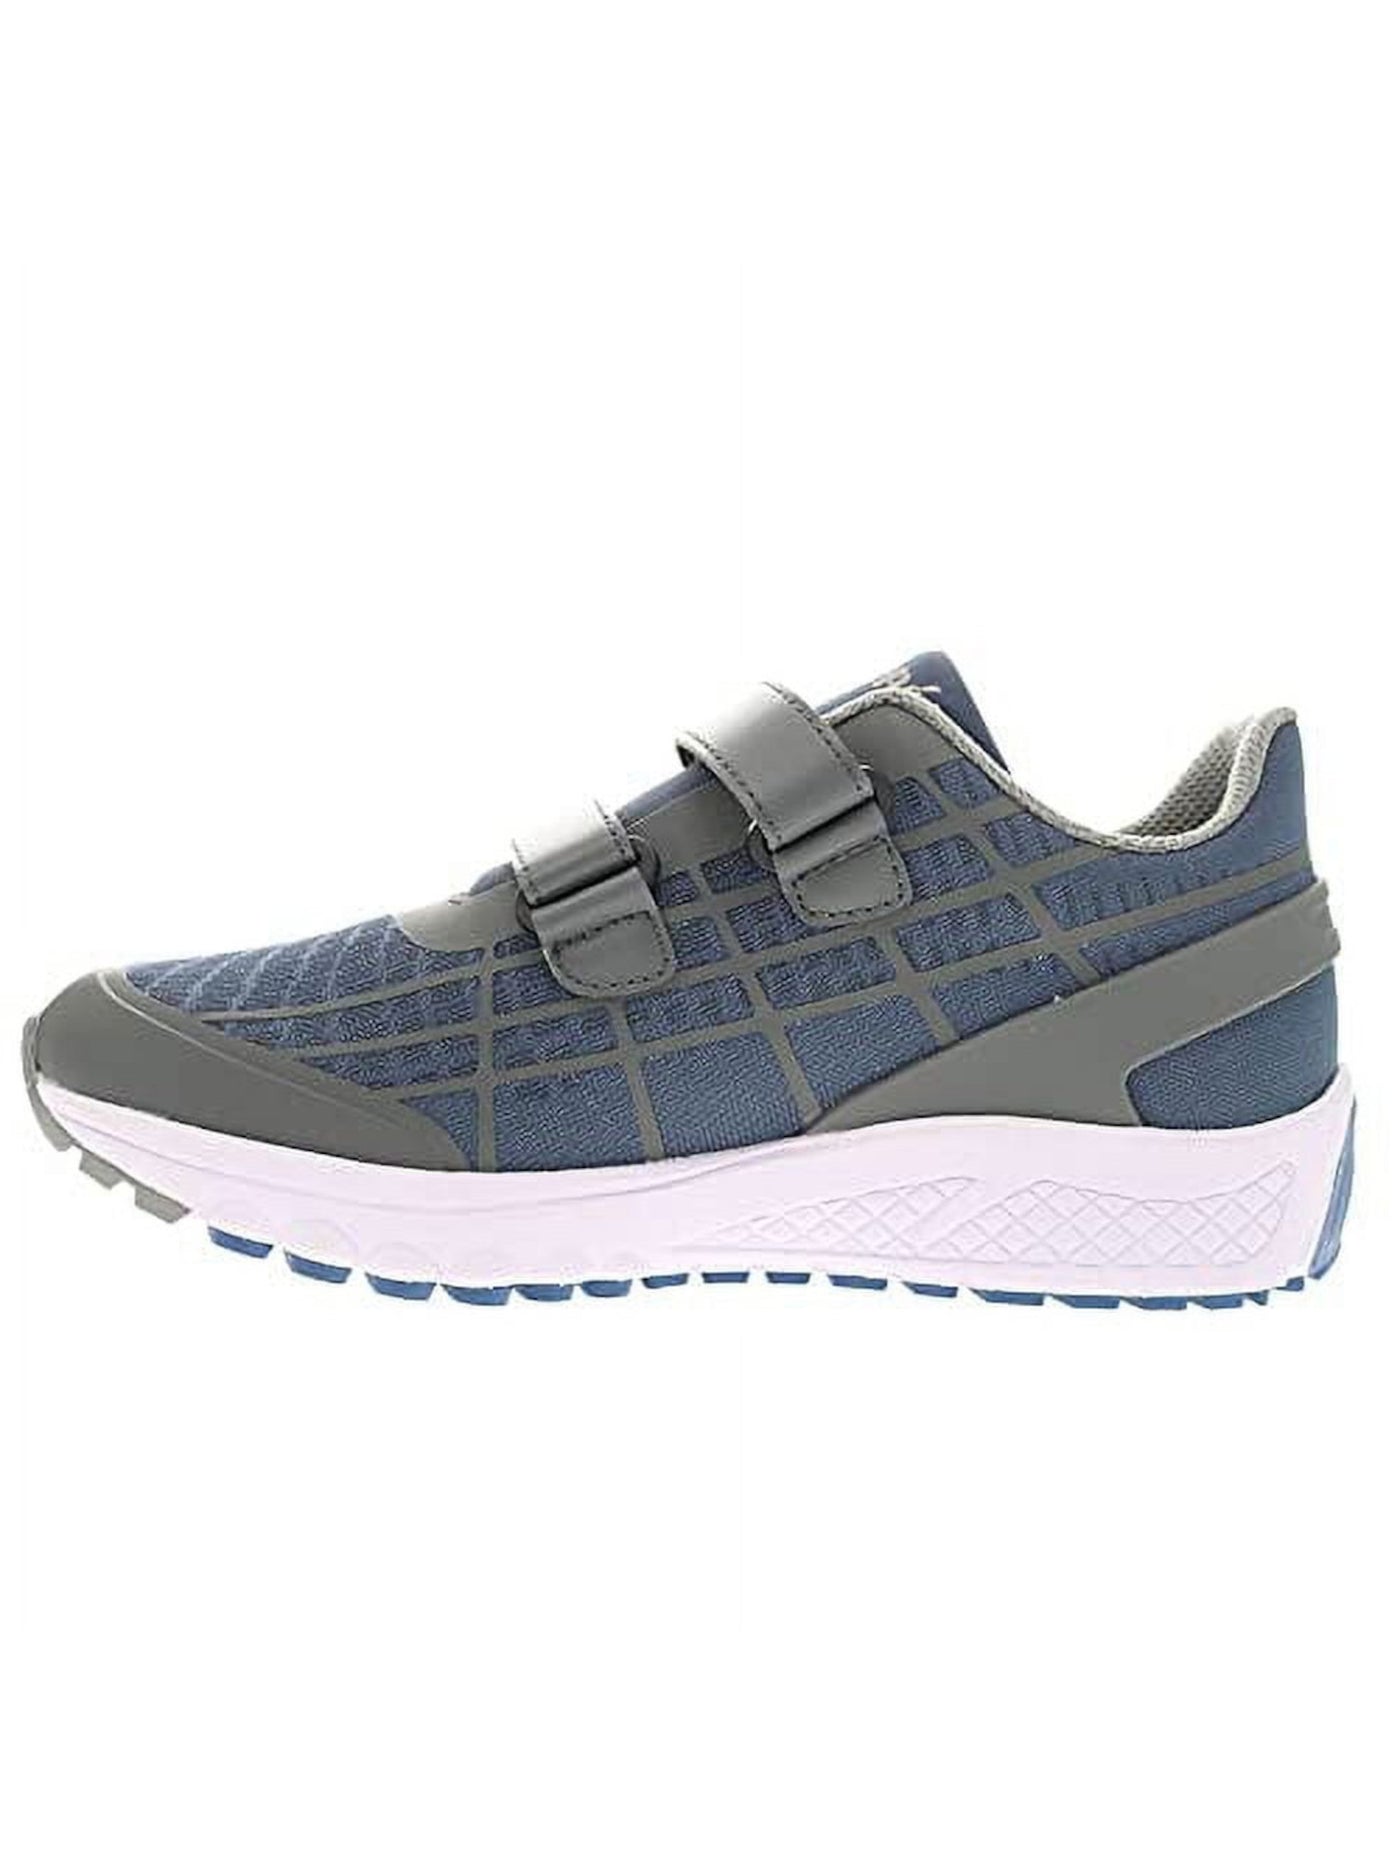 PROPET Womens Blue Mixed Media Anti Microbial Cushioned One Twin Strap Round Toe Platform Athletic Sneakers Shoes 9.5 W